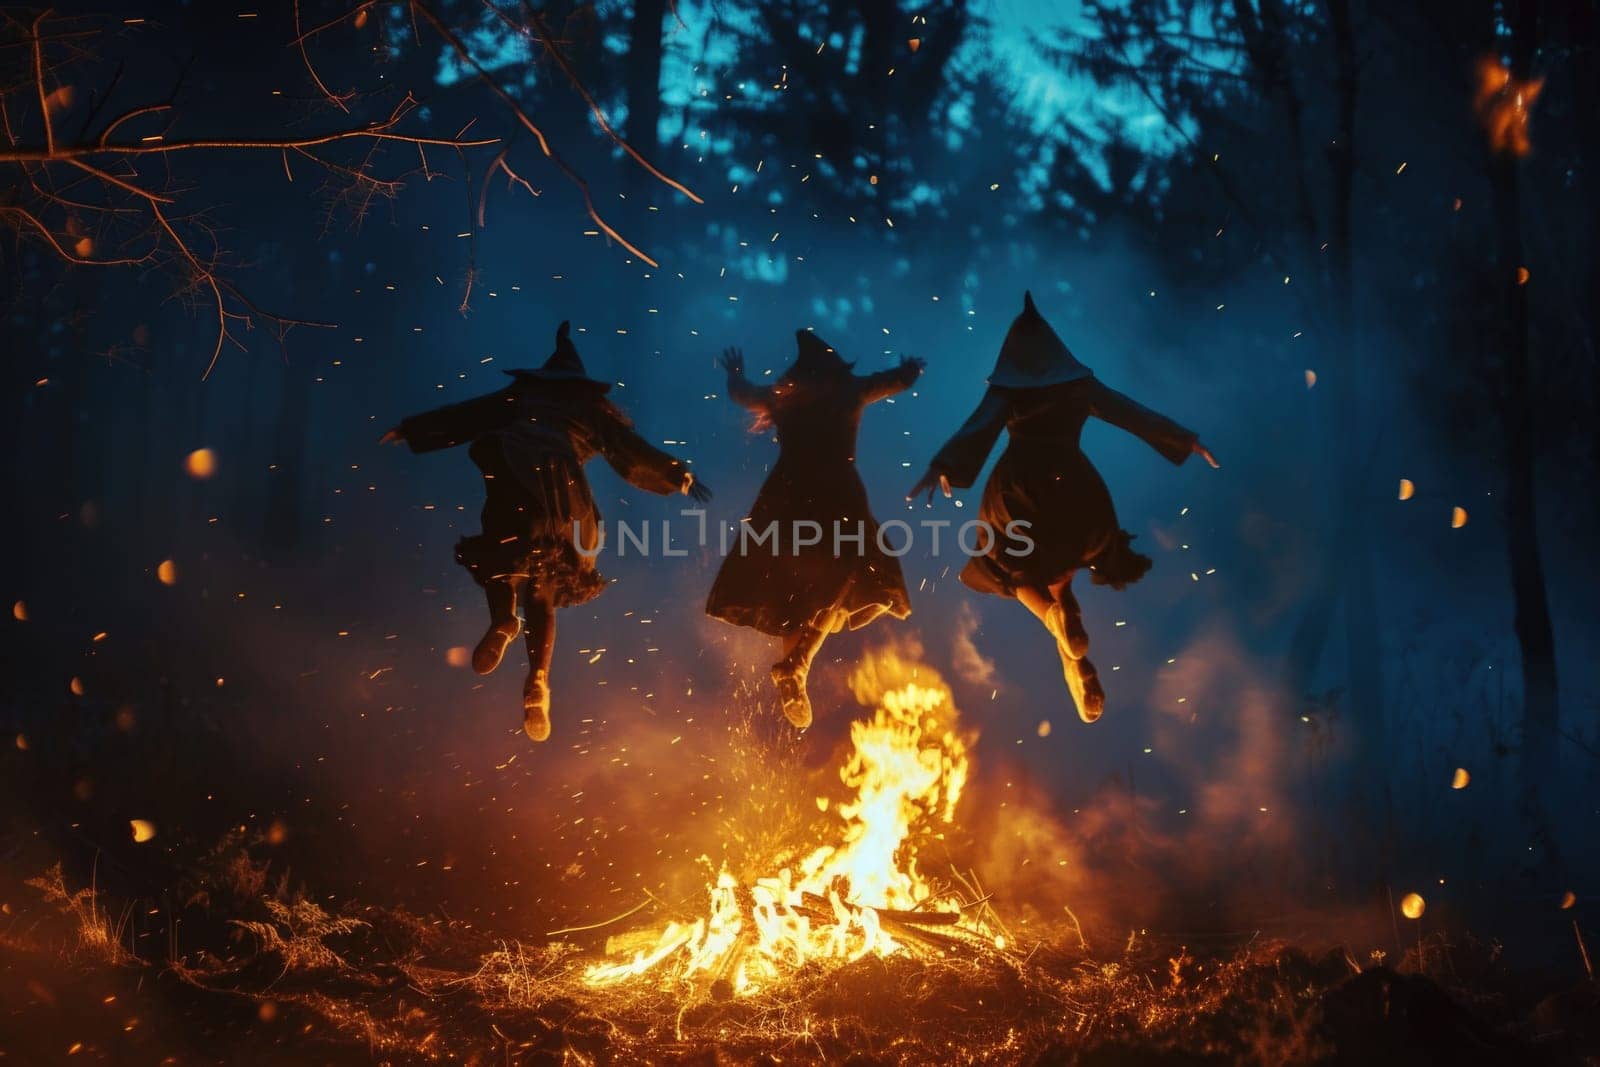 Three individuals from a coven are joyfully leaping over a blazing fire in the midst of a wooded area.